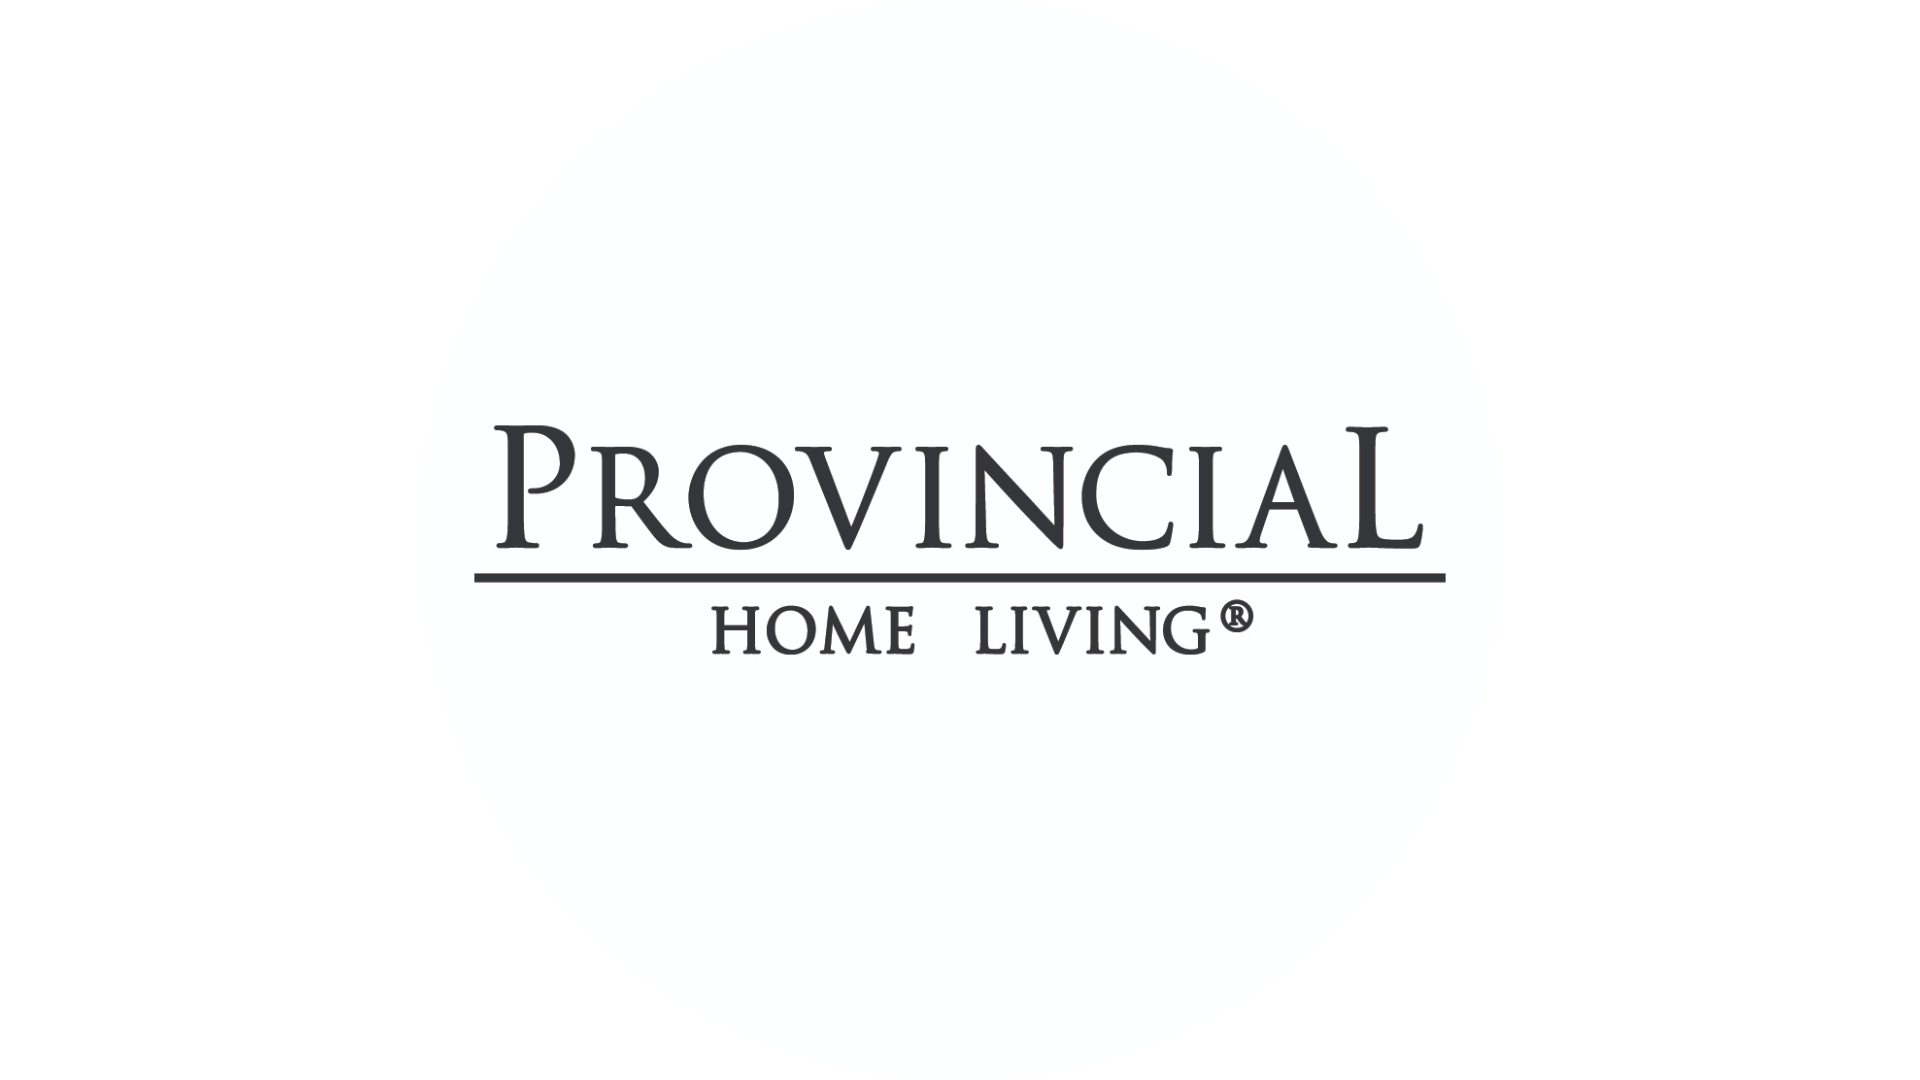 Get the Hamptons style with Provincial Home Living